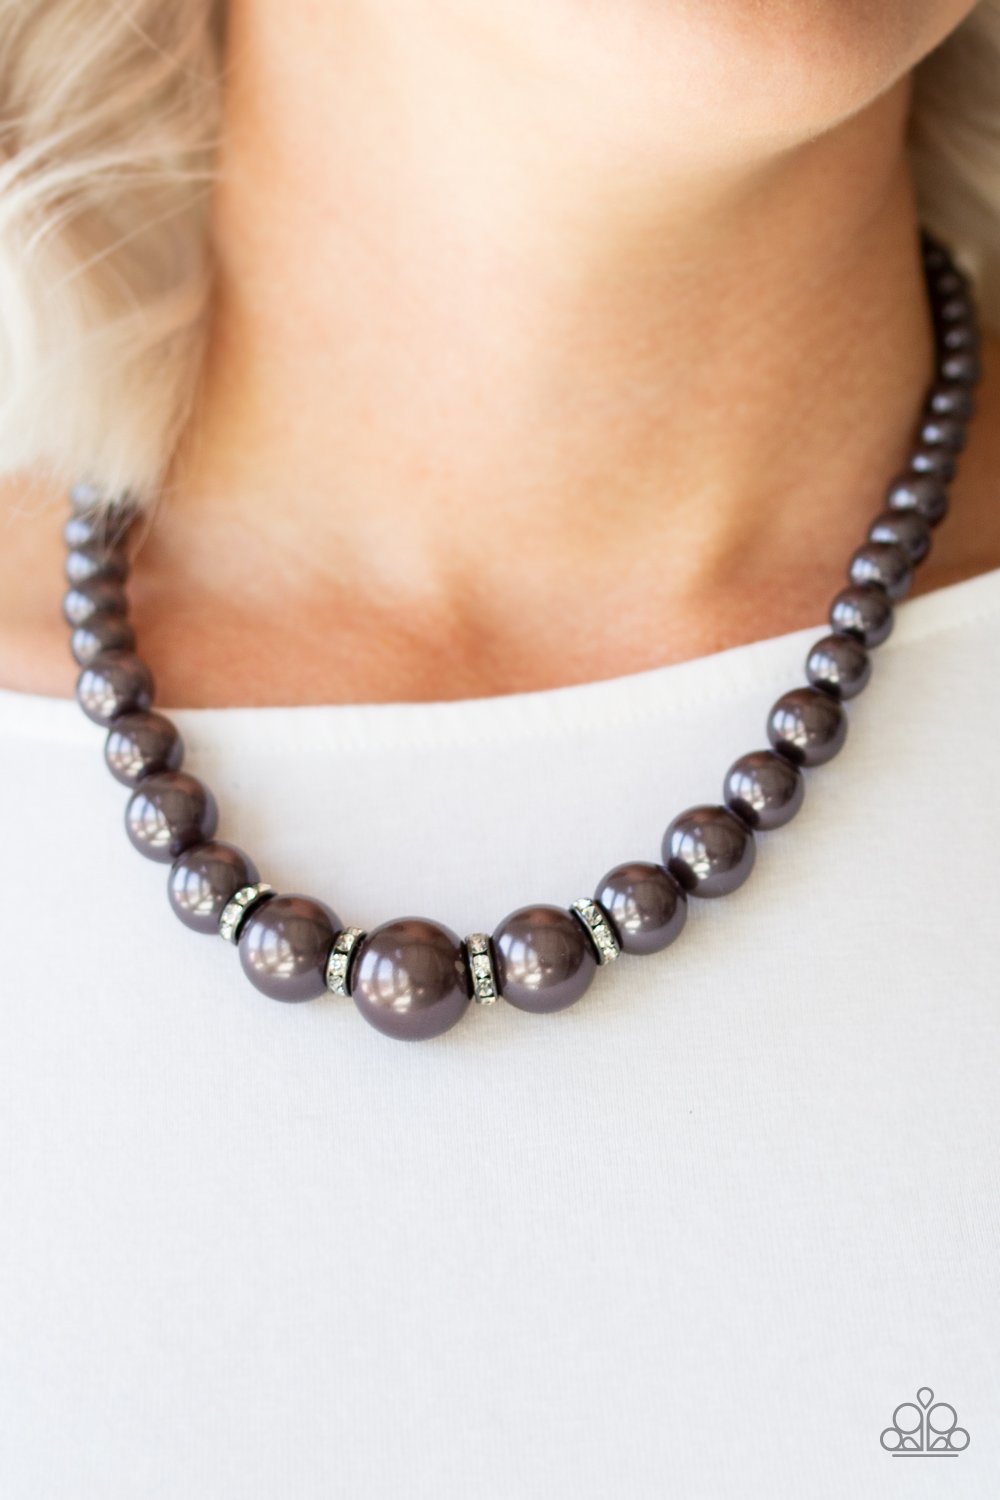 Party Pearls - Black - Paparazzi